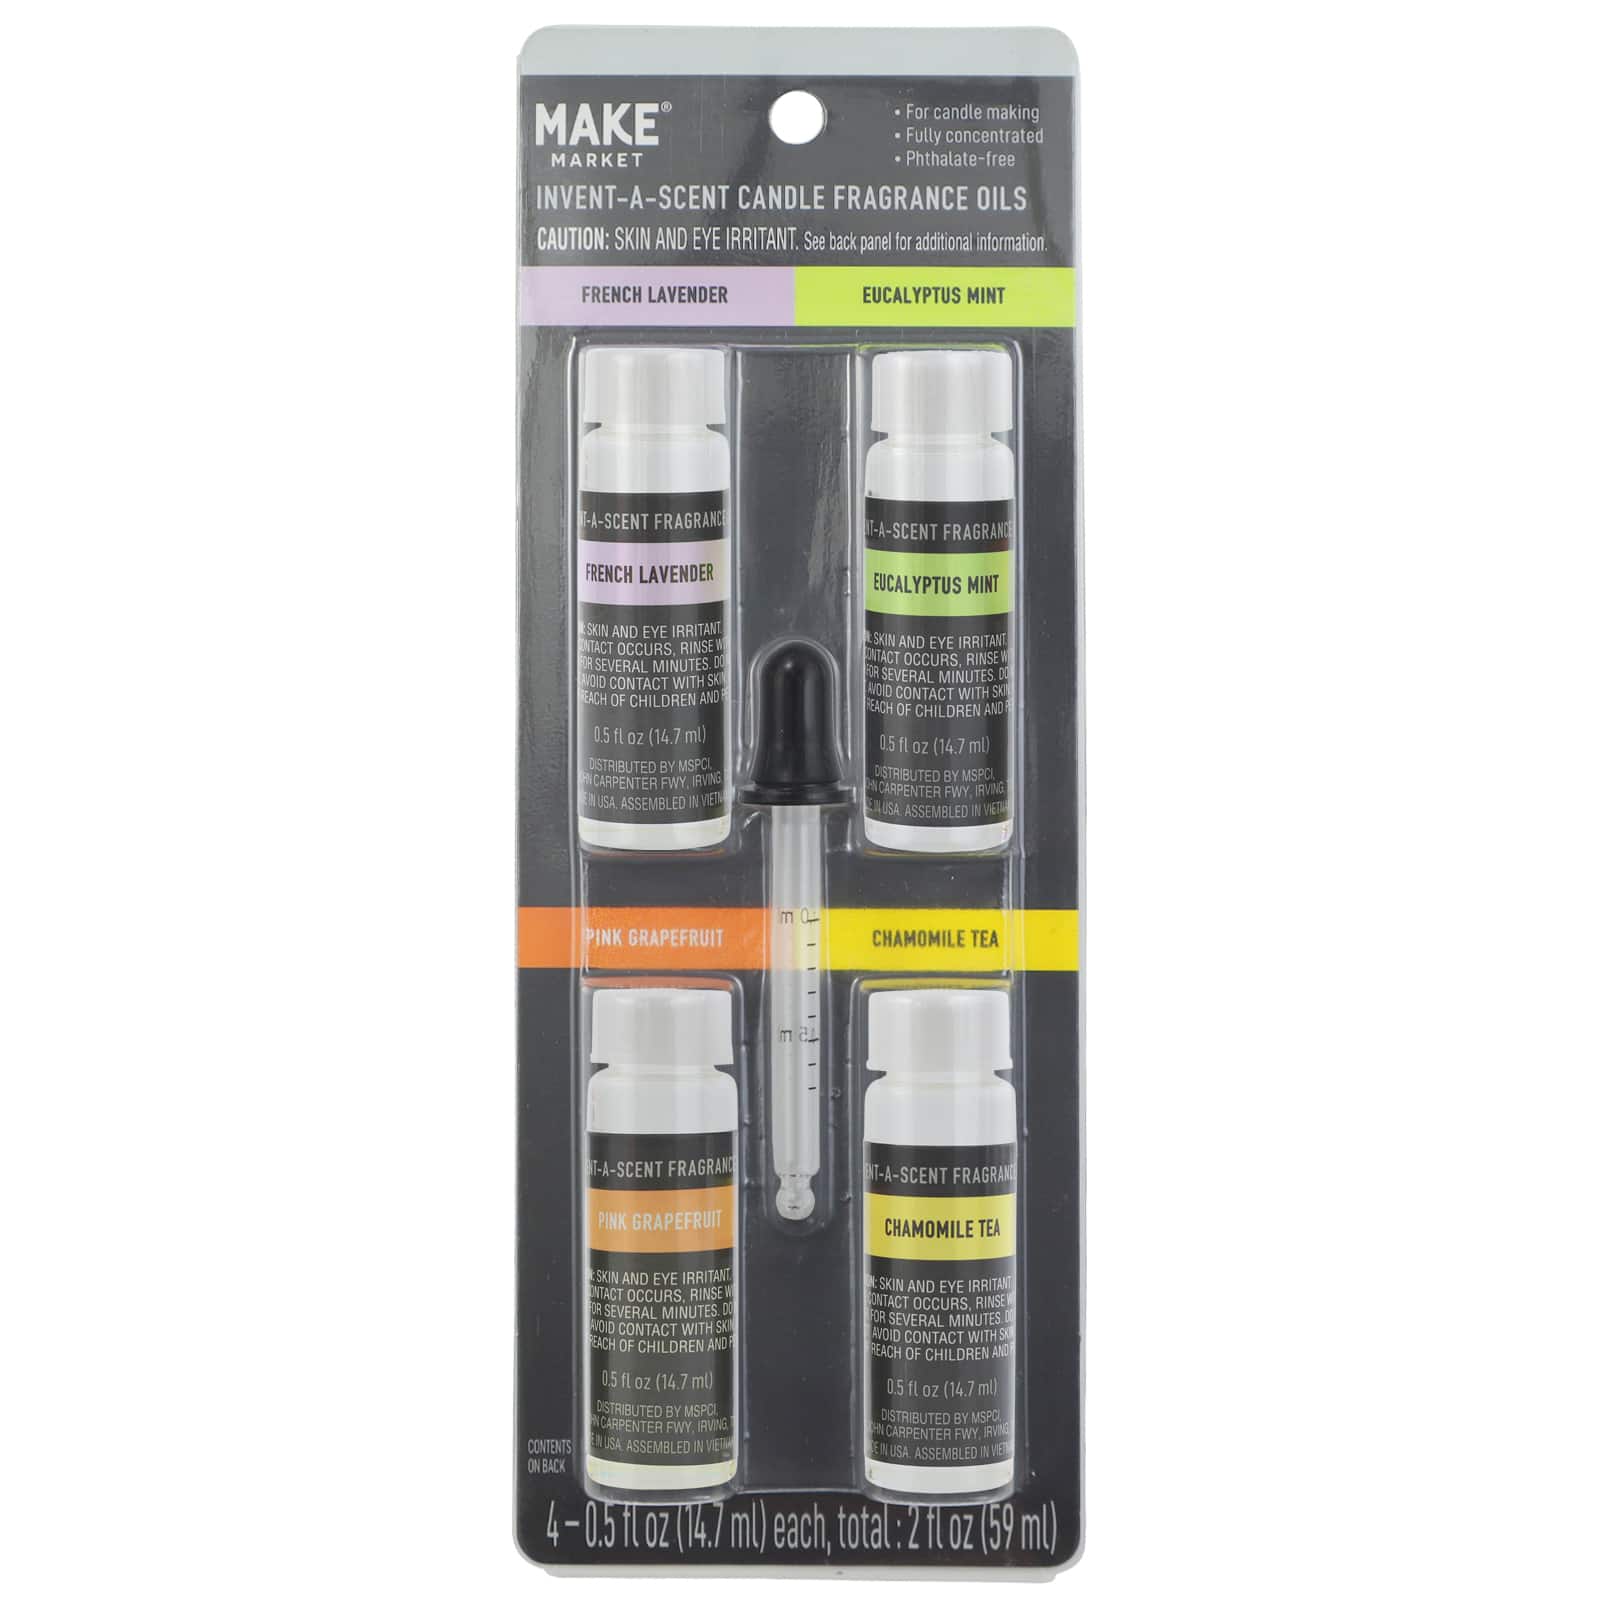 Invent-a-Scent Spa Candle Fragrance Oil Set by Make Market&#xAE;